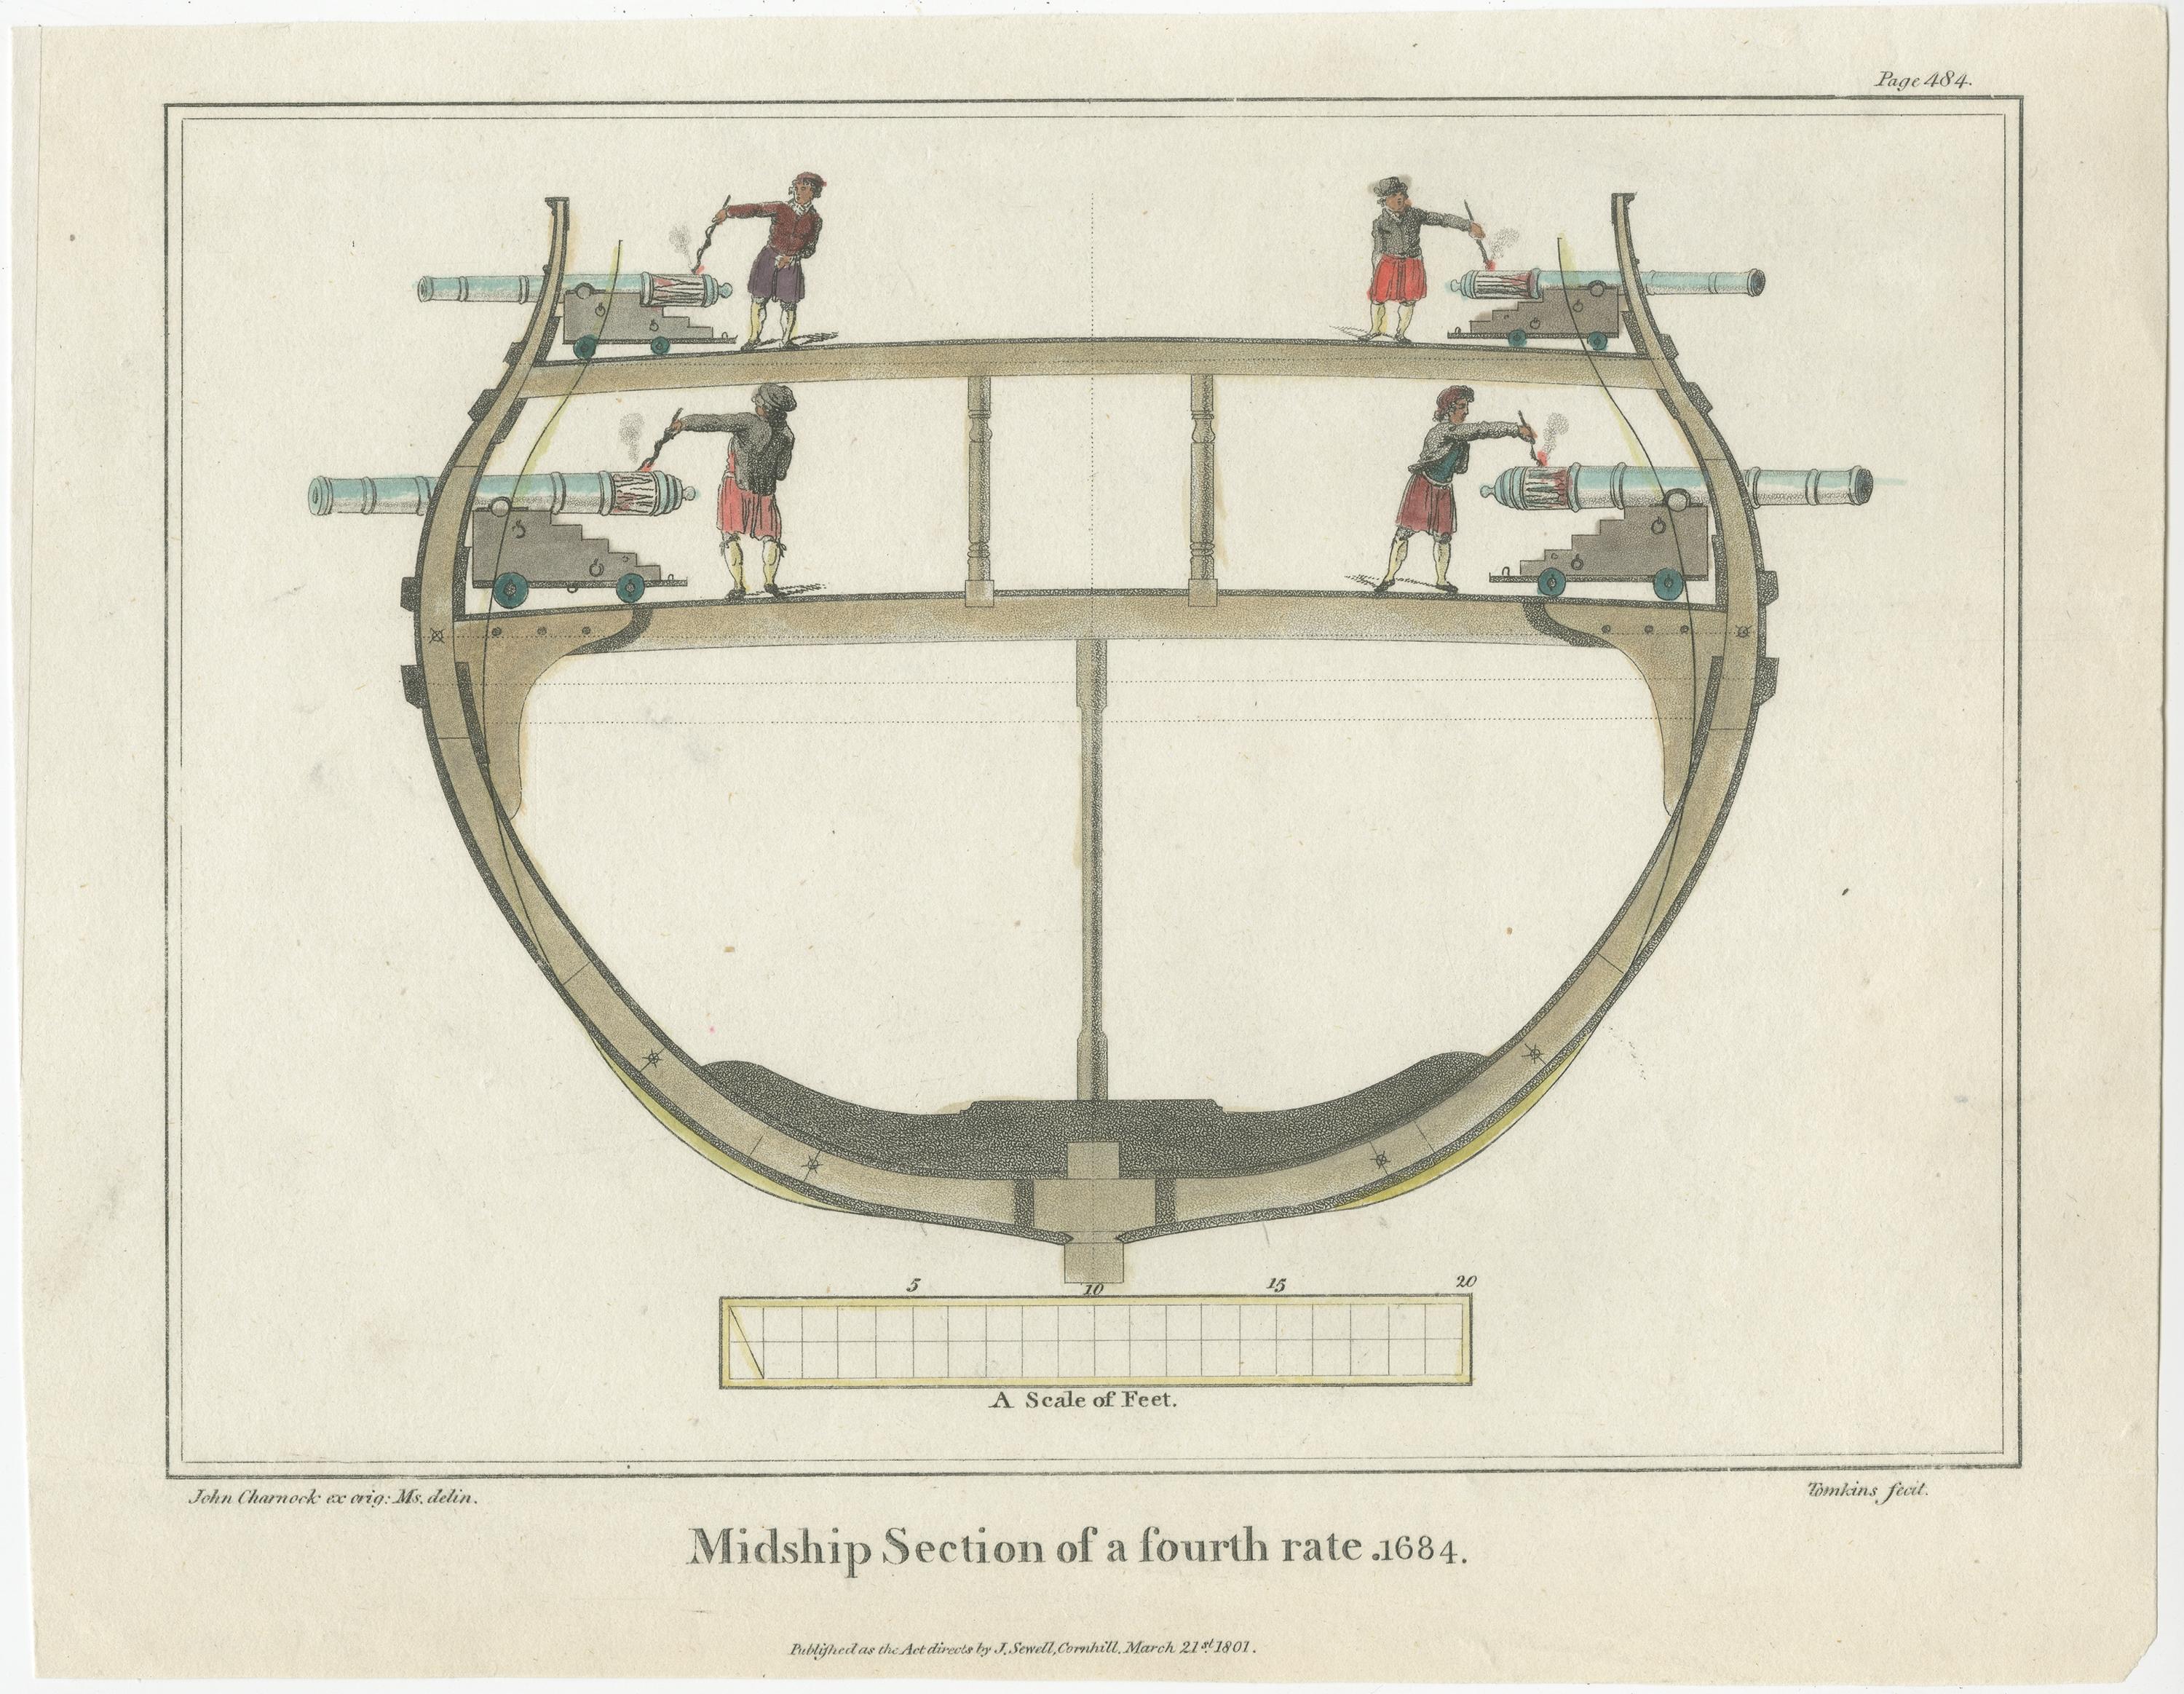 Description: Antique print titled 'Midship Section of a fourth rate. 1684'. 

Midship section of a fourth rate war vessel with armament detail. Soldiers prepare to fire cannons. This print originates from John Charnock's 'History of Marine